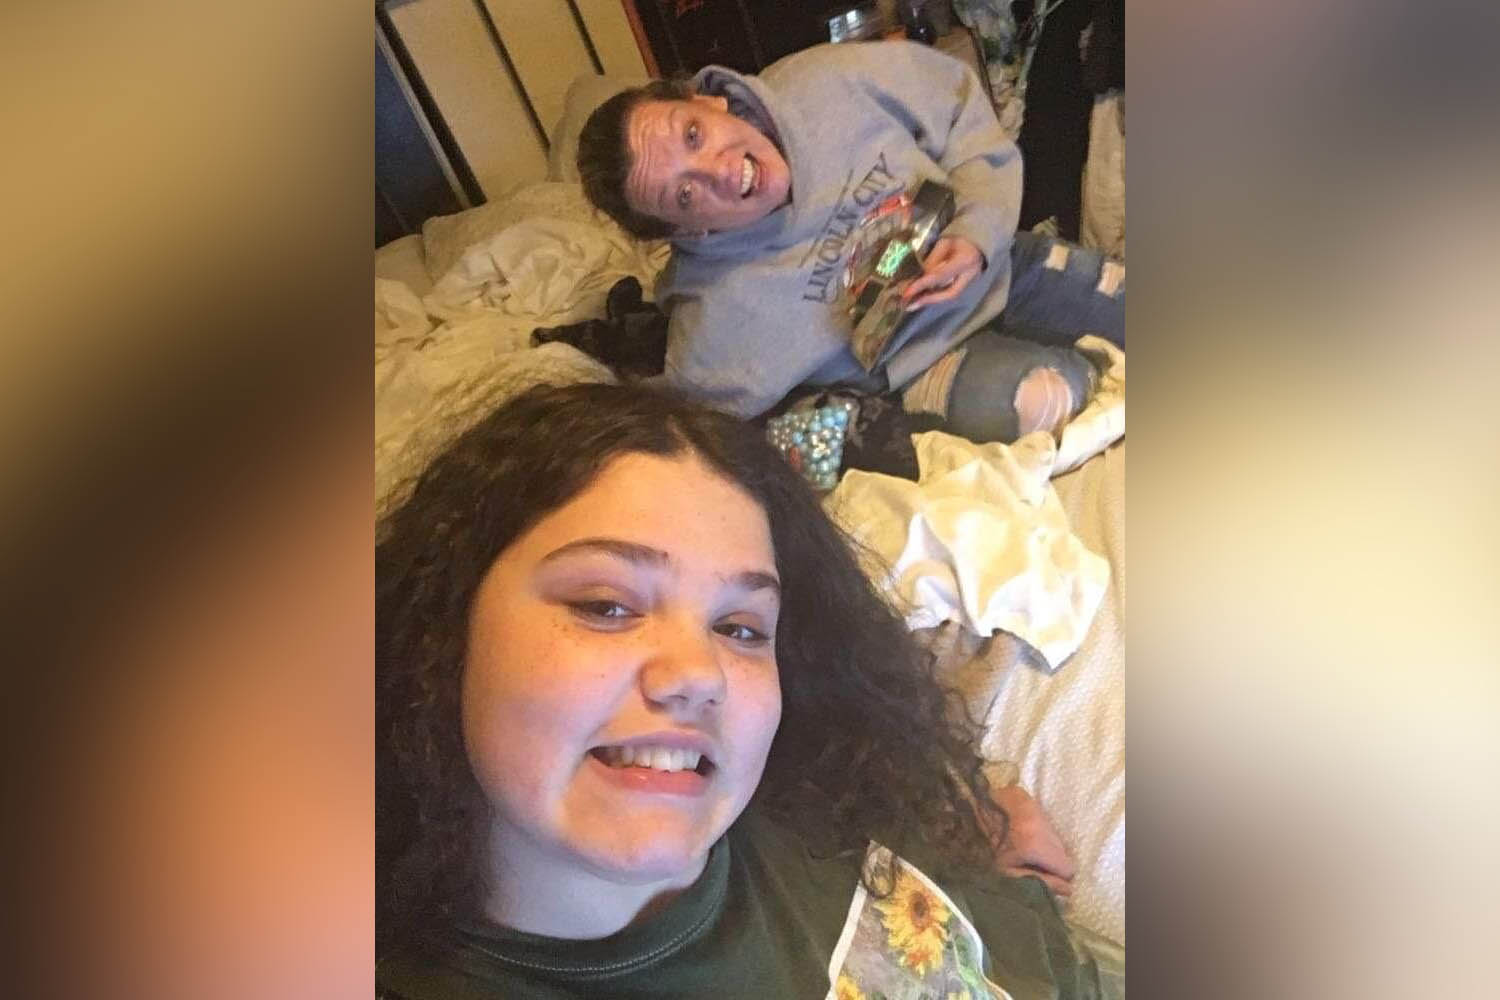 13-year-old girl severely burned while imitating TikTok video, family says  - ABC News